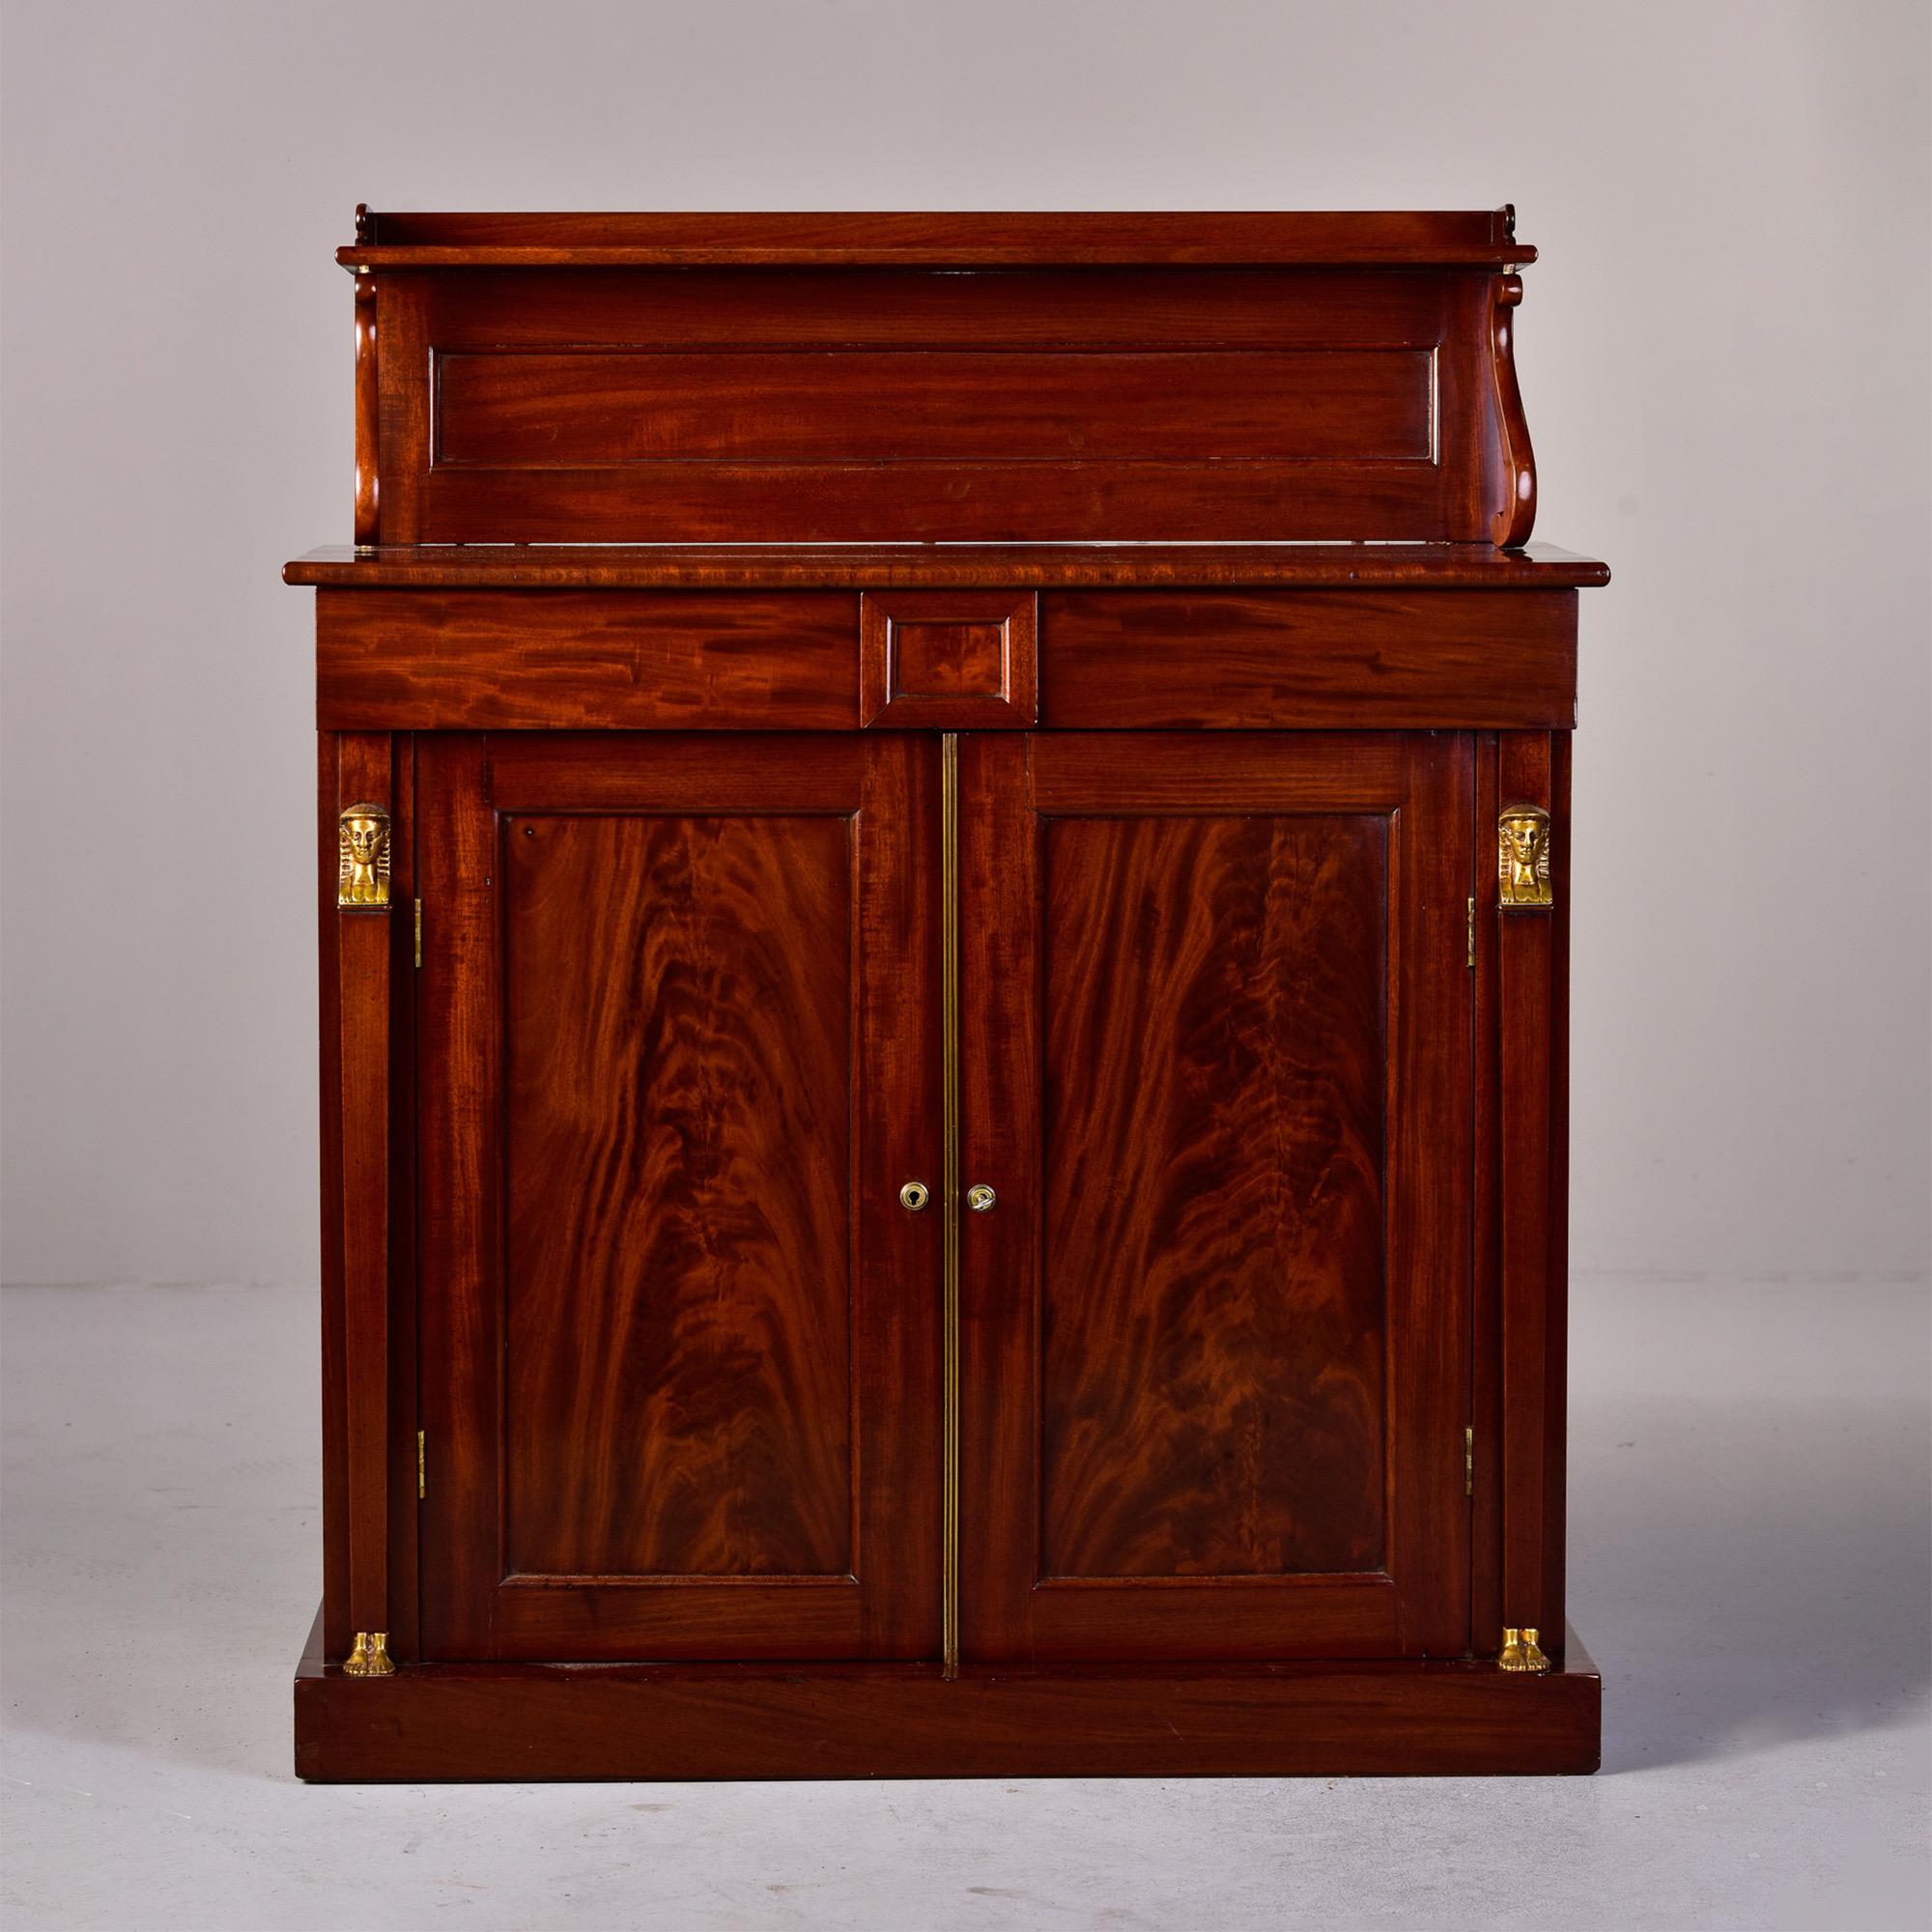 Circa 1815 French empire chiffonier made of mahogany with applied gilt bronze decorations with an Egyptian motif. Cabinet has lower hinged doors with functional lock and internal shelf on each side. Gilt bronze Egyptian bust and feet on sides and of